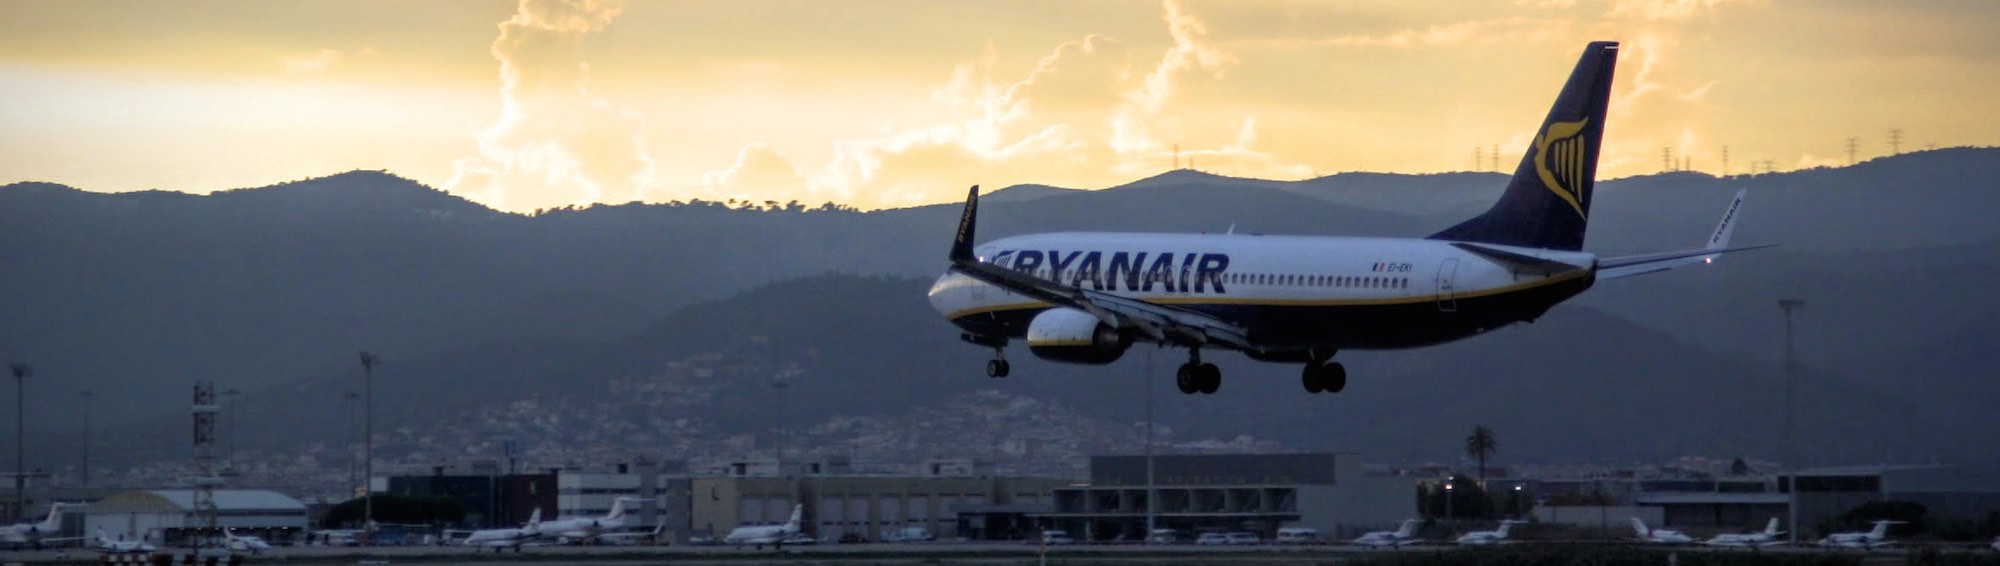 Best time to book flights for Berlin (BER) to Tenerife (TFS) flights with Ryanair at AirHint